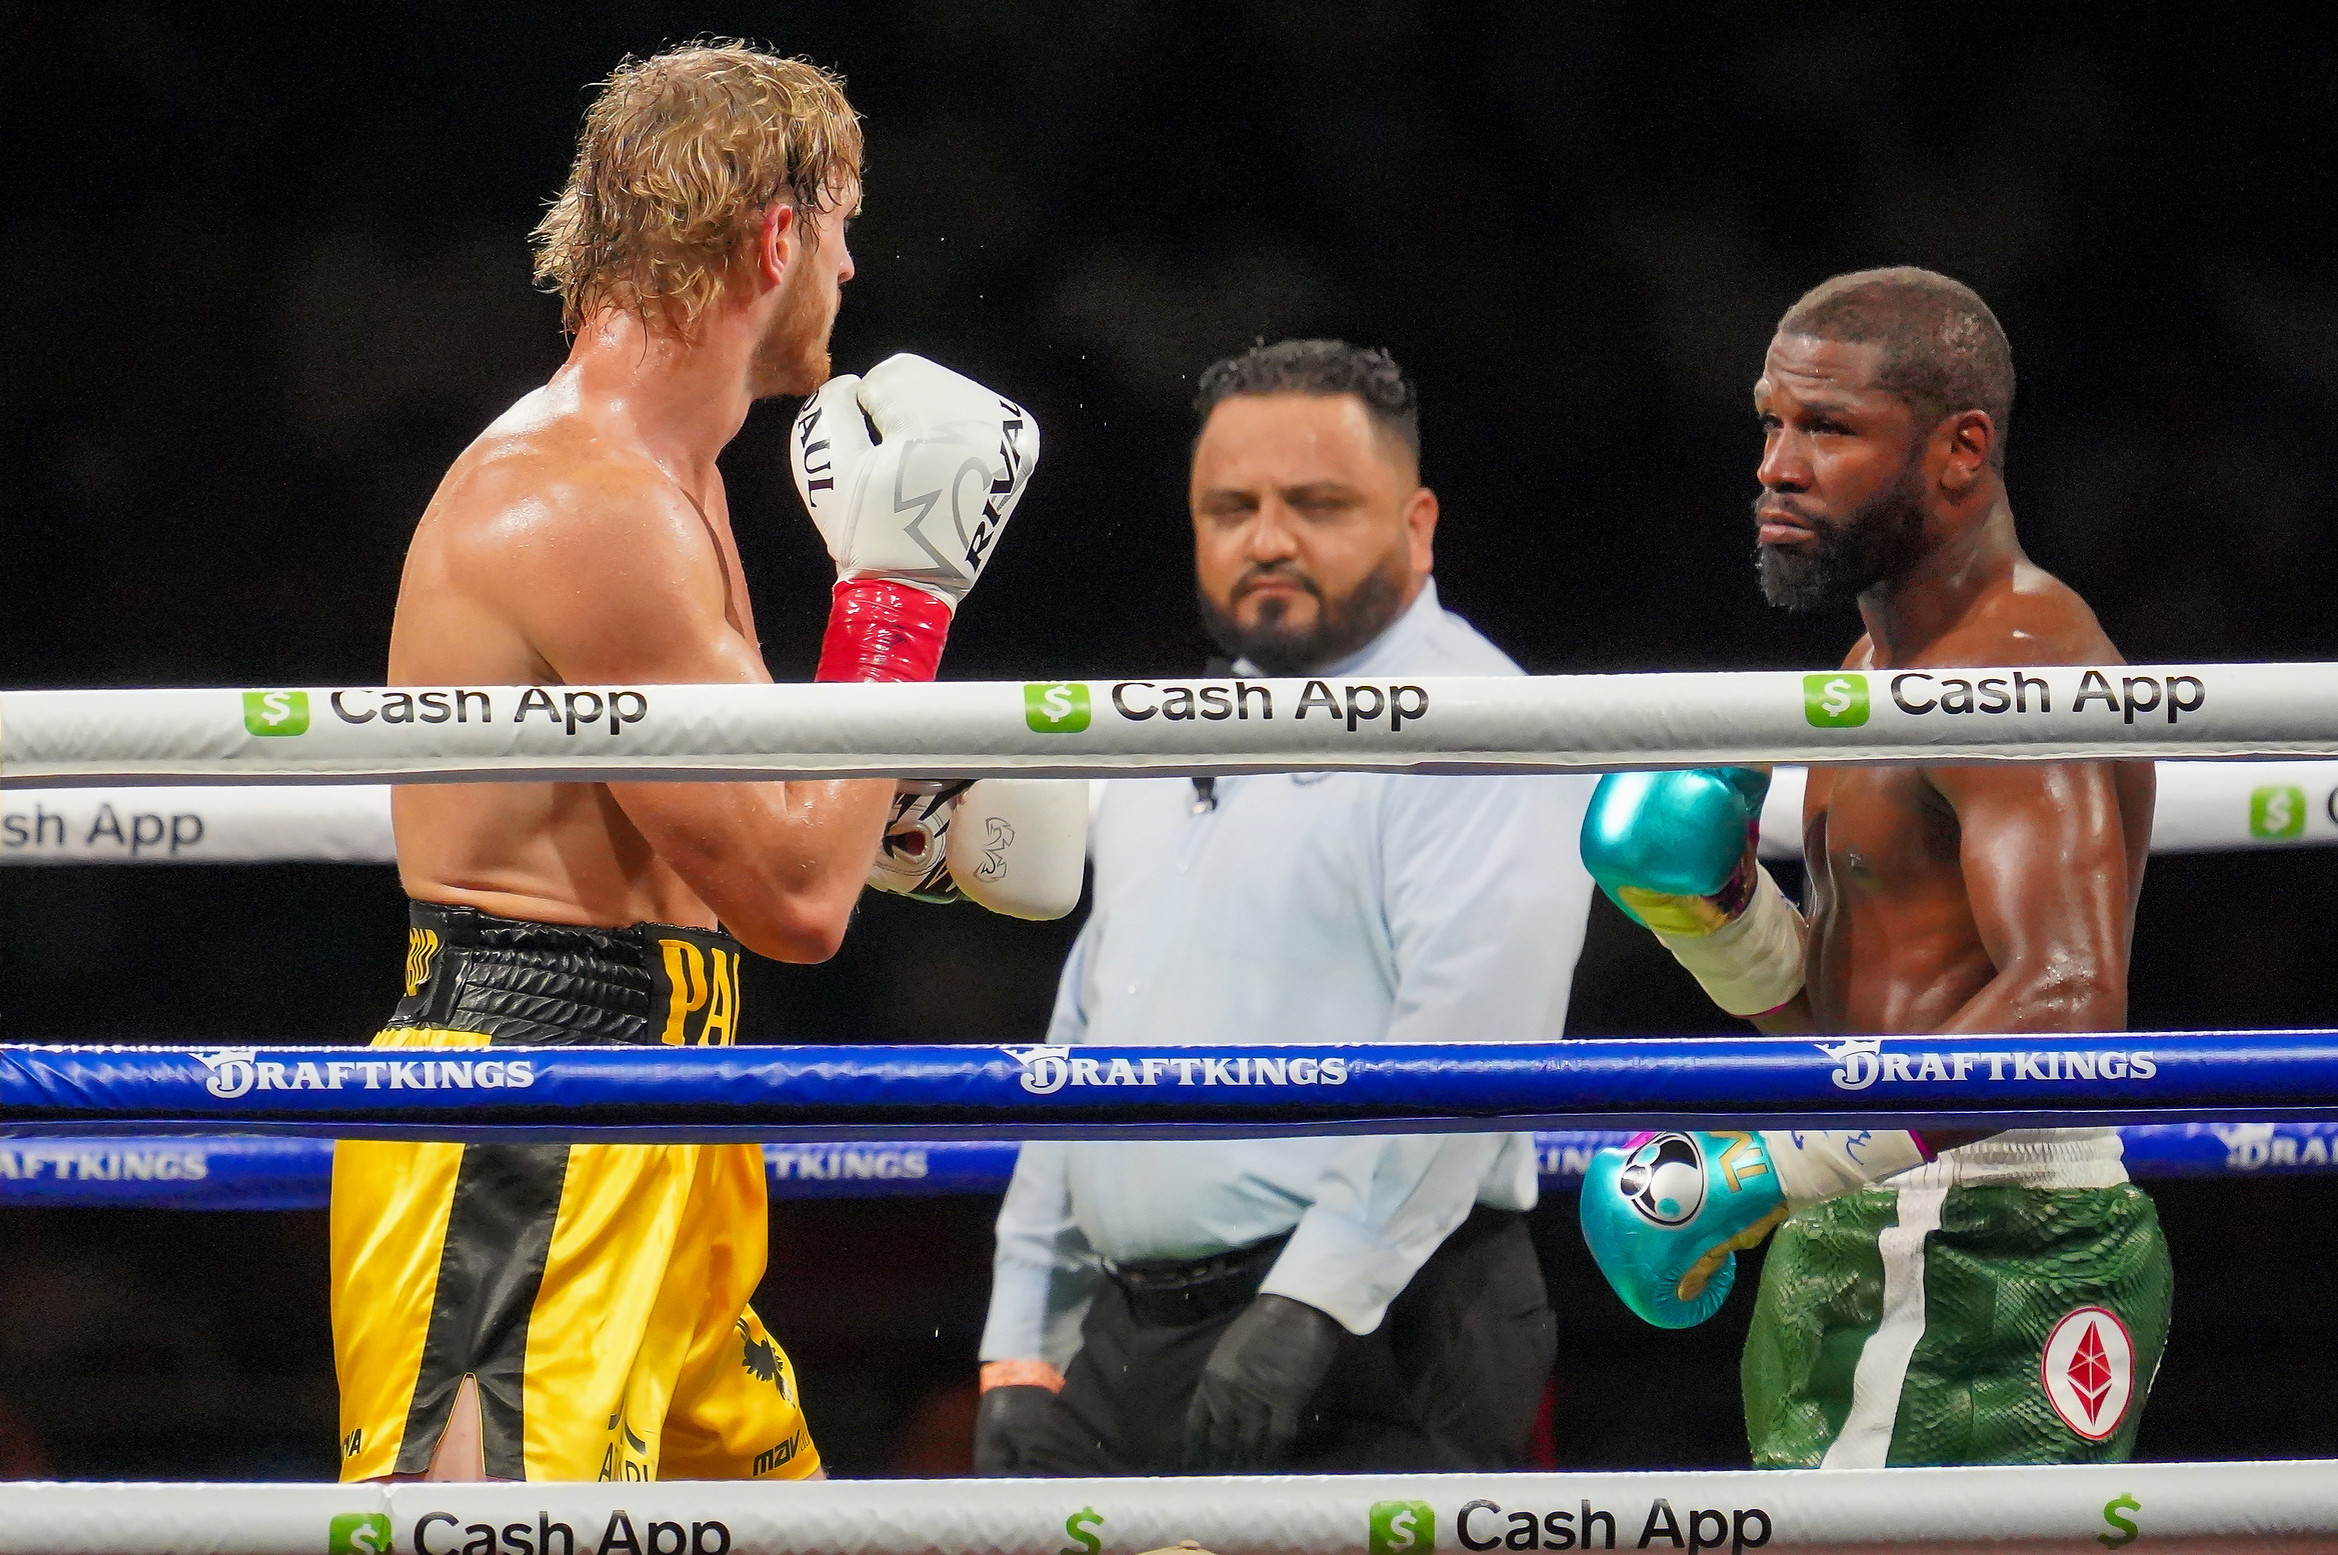 Logan Paul vs. Floyd Mayweather: Who won? What was the score? - Deseret News